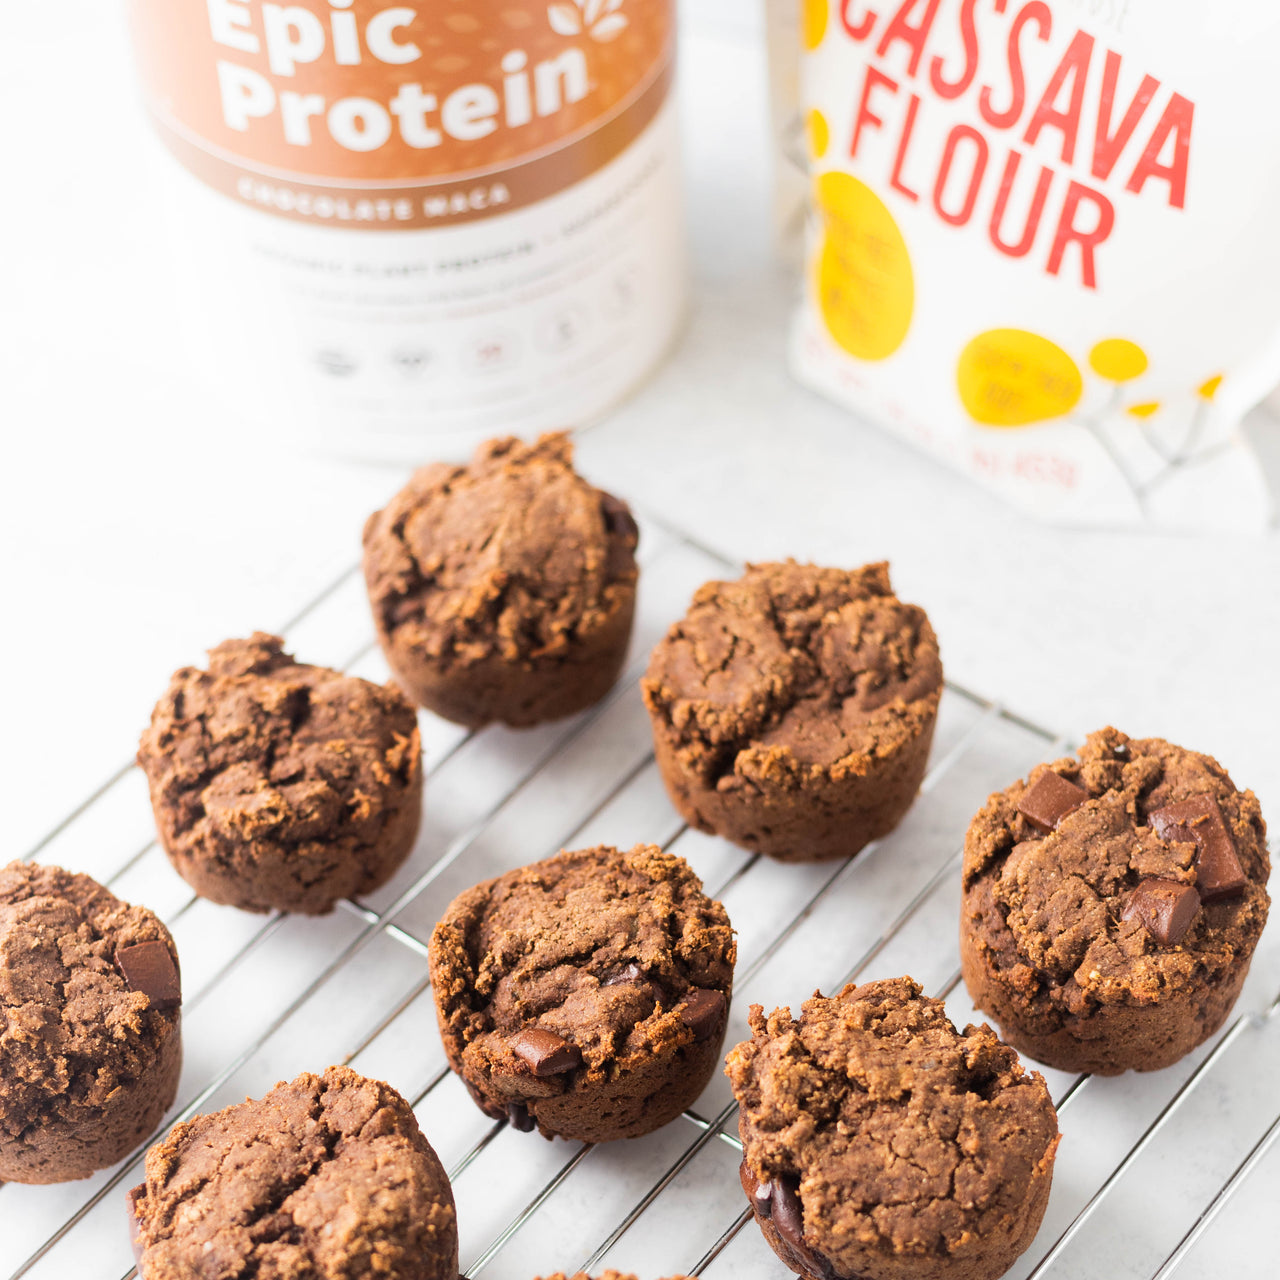 Chocolate Protein Muffins with Epic Protein and cassava flour